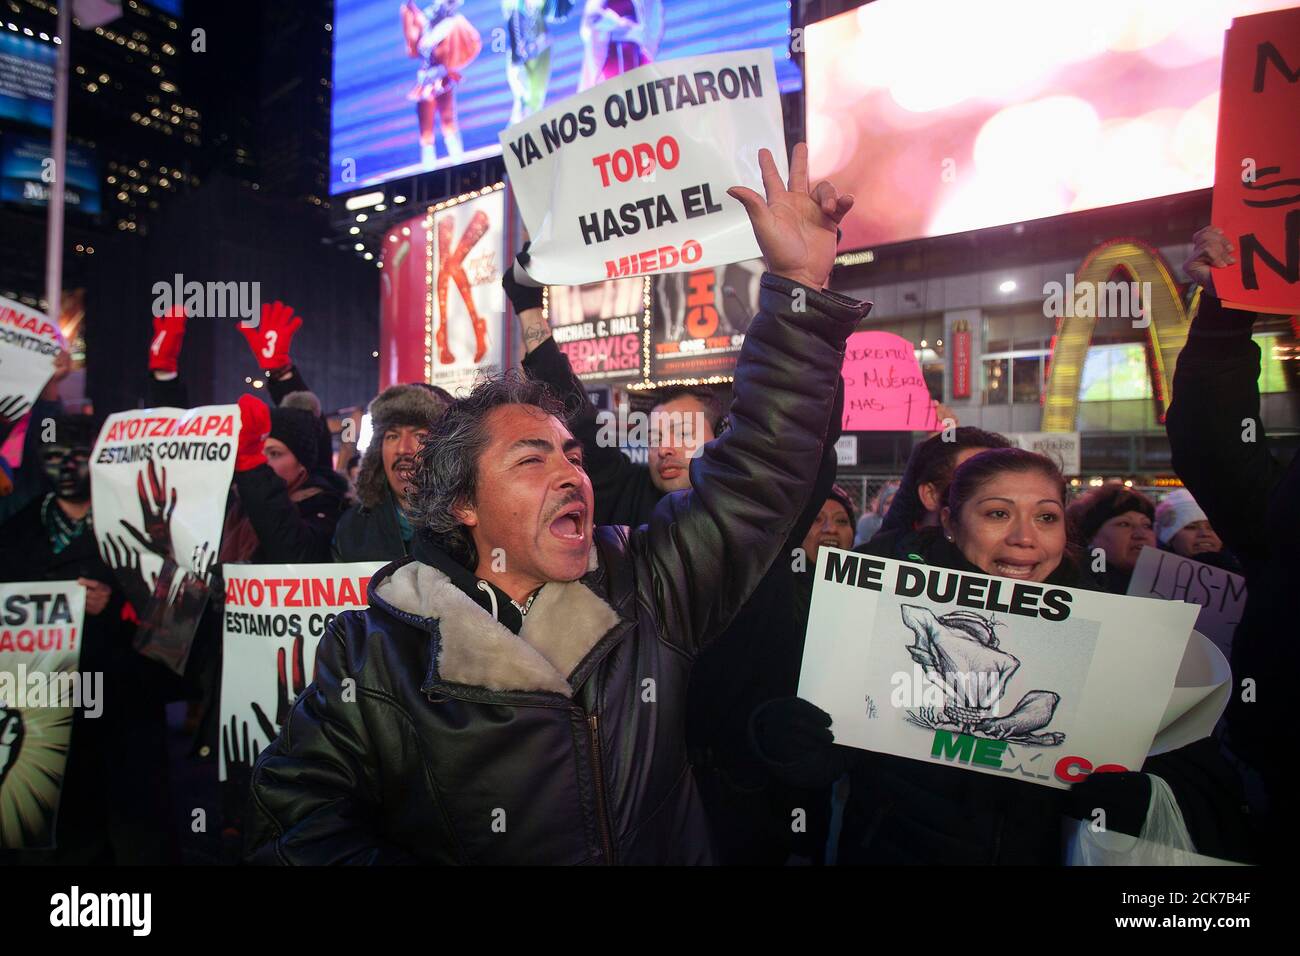 Protesters hold signs as they demonstrate against the Mexican government during U.S. President Barack Obama's speech on immigration reform, at Times Square in New York November 20, 2014. The protesters say they were demonstrating against the Mexican government on various issues such as the 43 missing Ayotzinapa students and on immigration reform. The signs read as 'We are Ayotzinapa' (L),  'They took everything from us, even fear' (C) and 'You hurt me Mexico' (R). REUTERS/Carlo Allegri (UNITED STATES - Tags: POLITICS CIVIL UNREST) Stock Photo